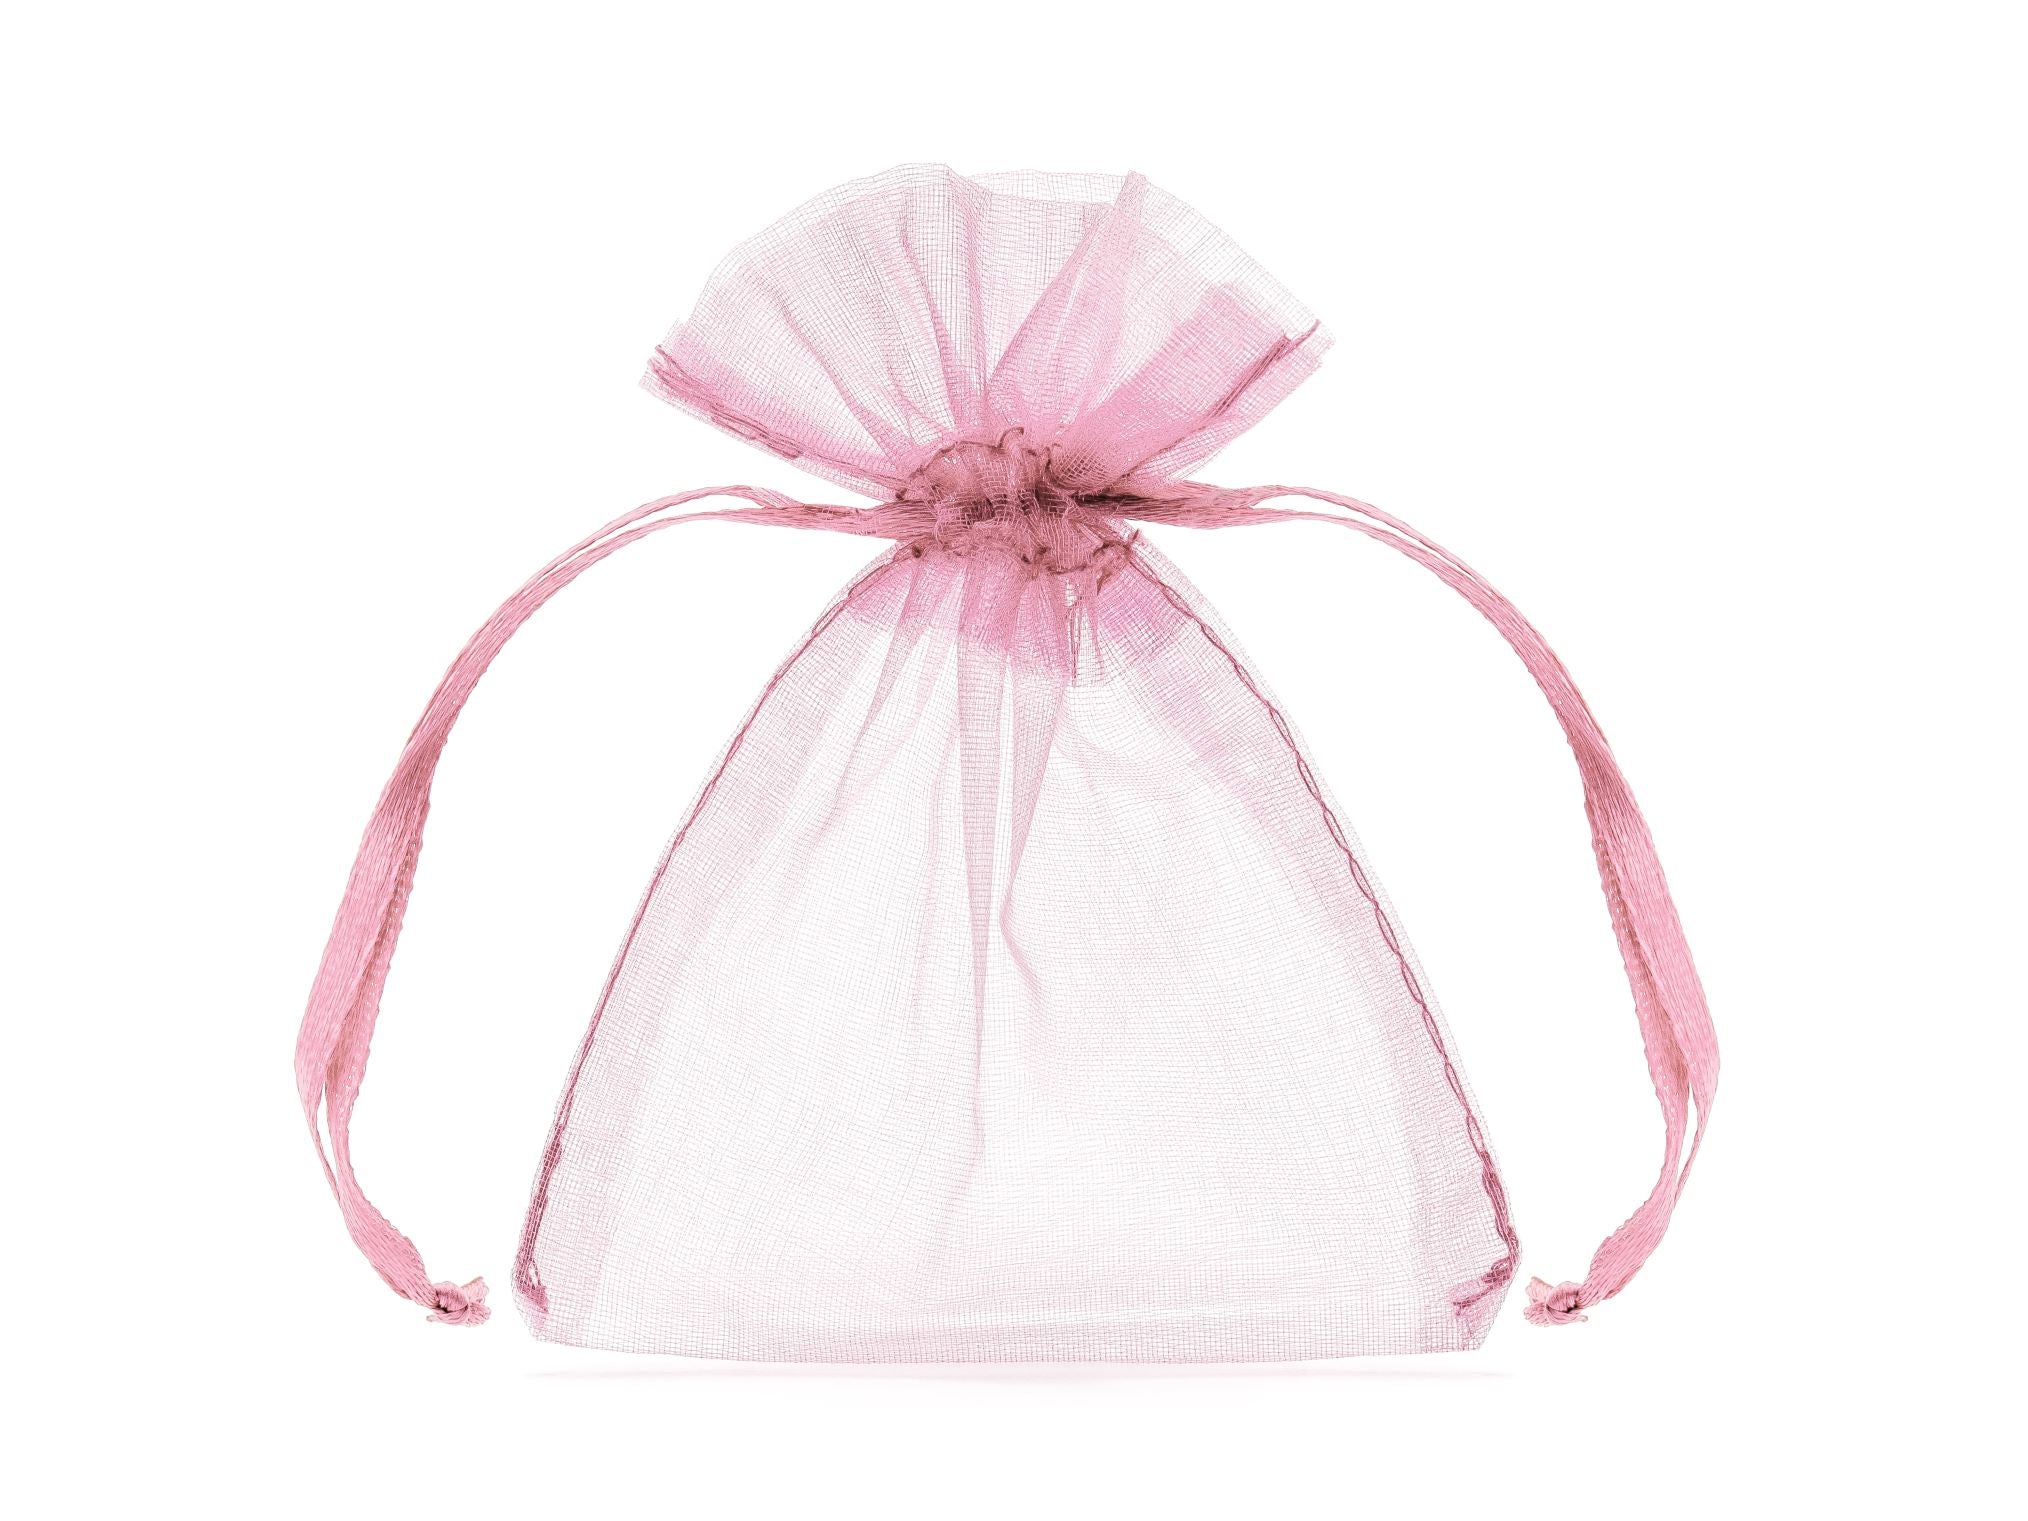 Pink Organza Bags 7.5 X10cm Pack of 10